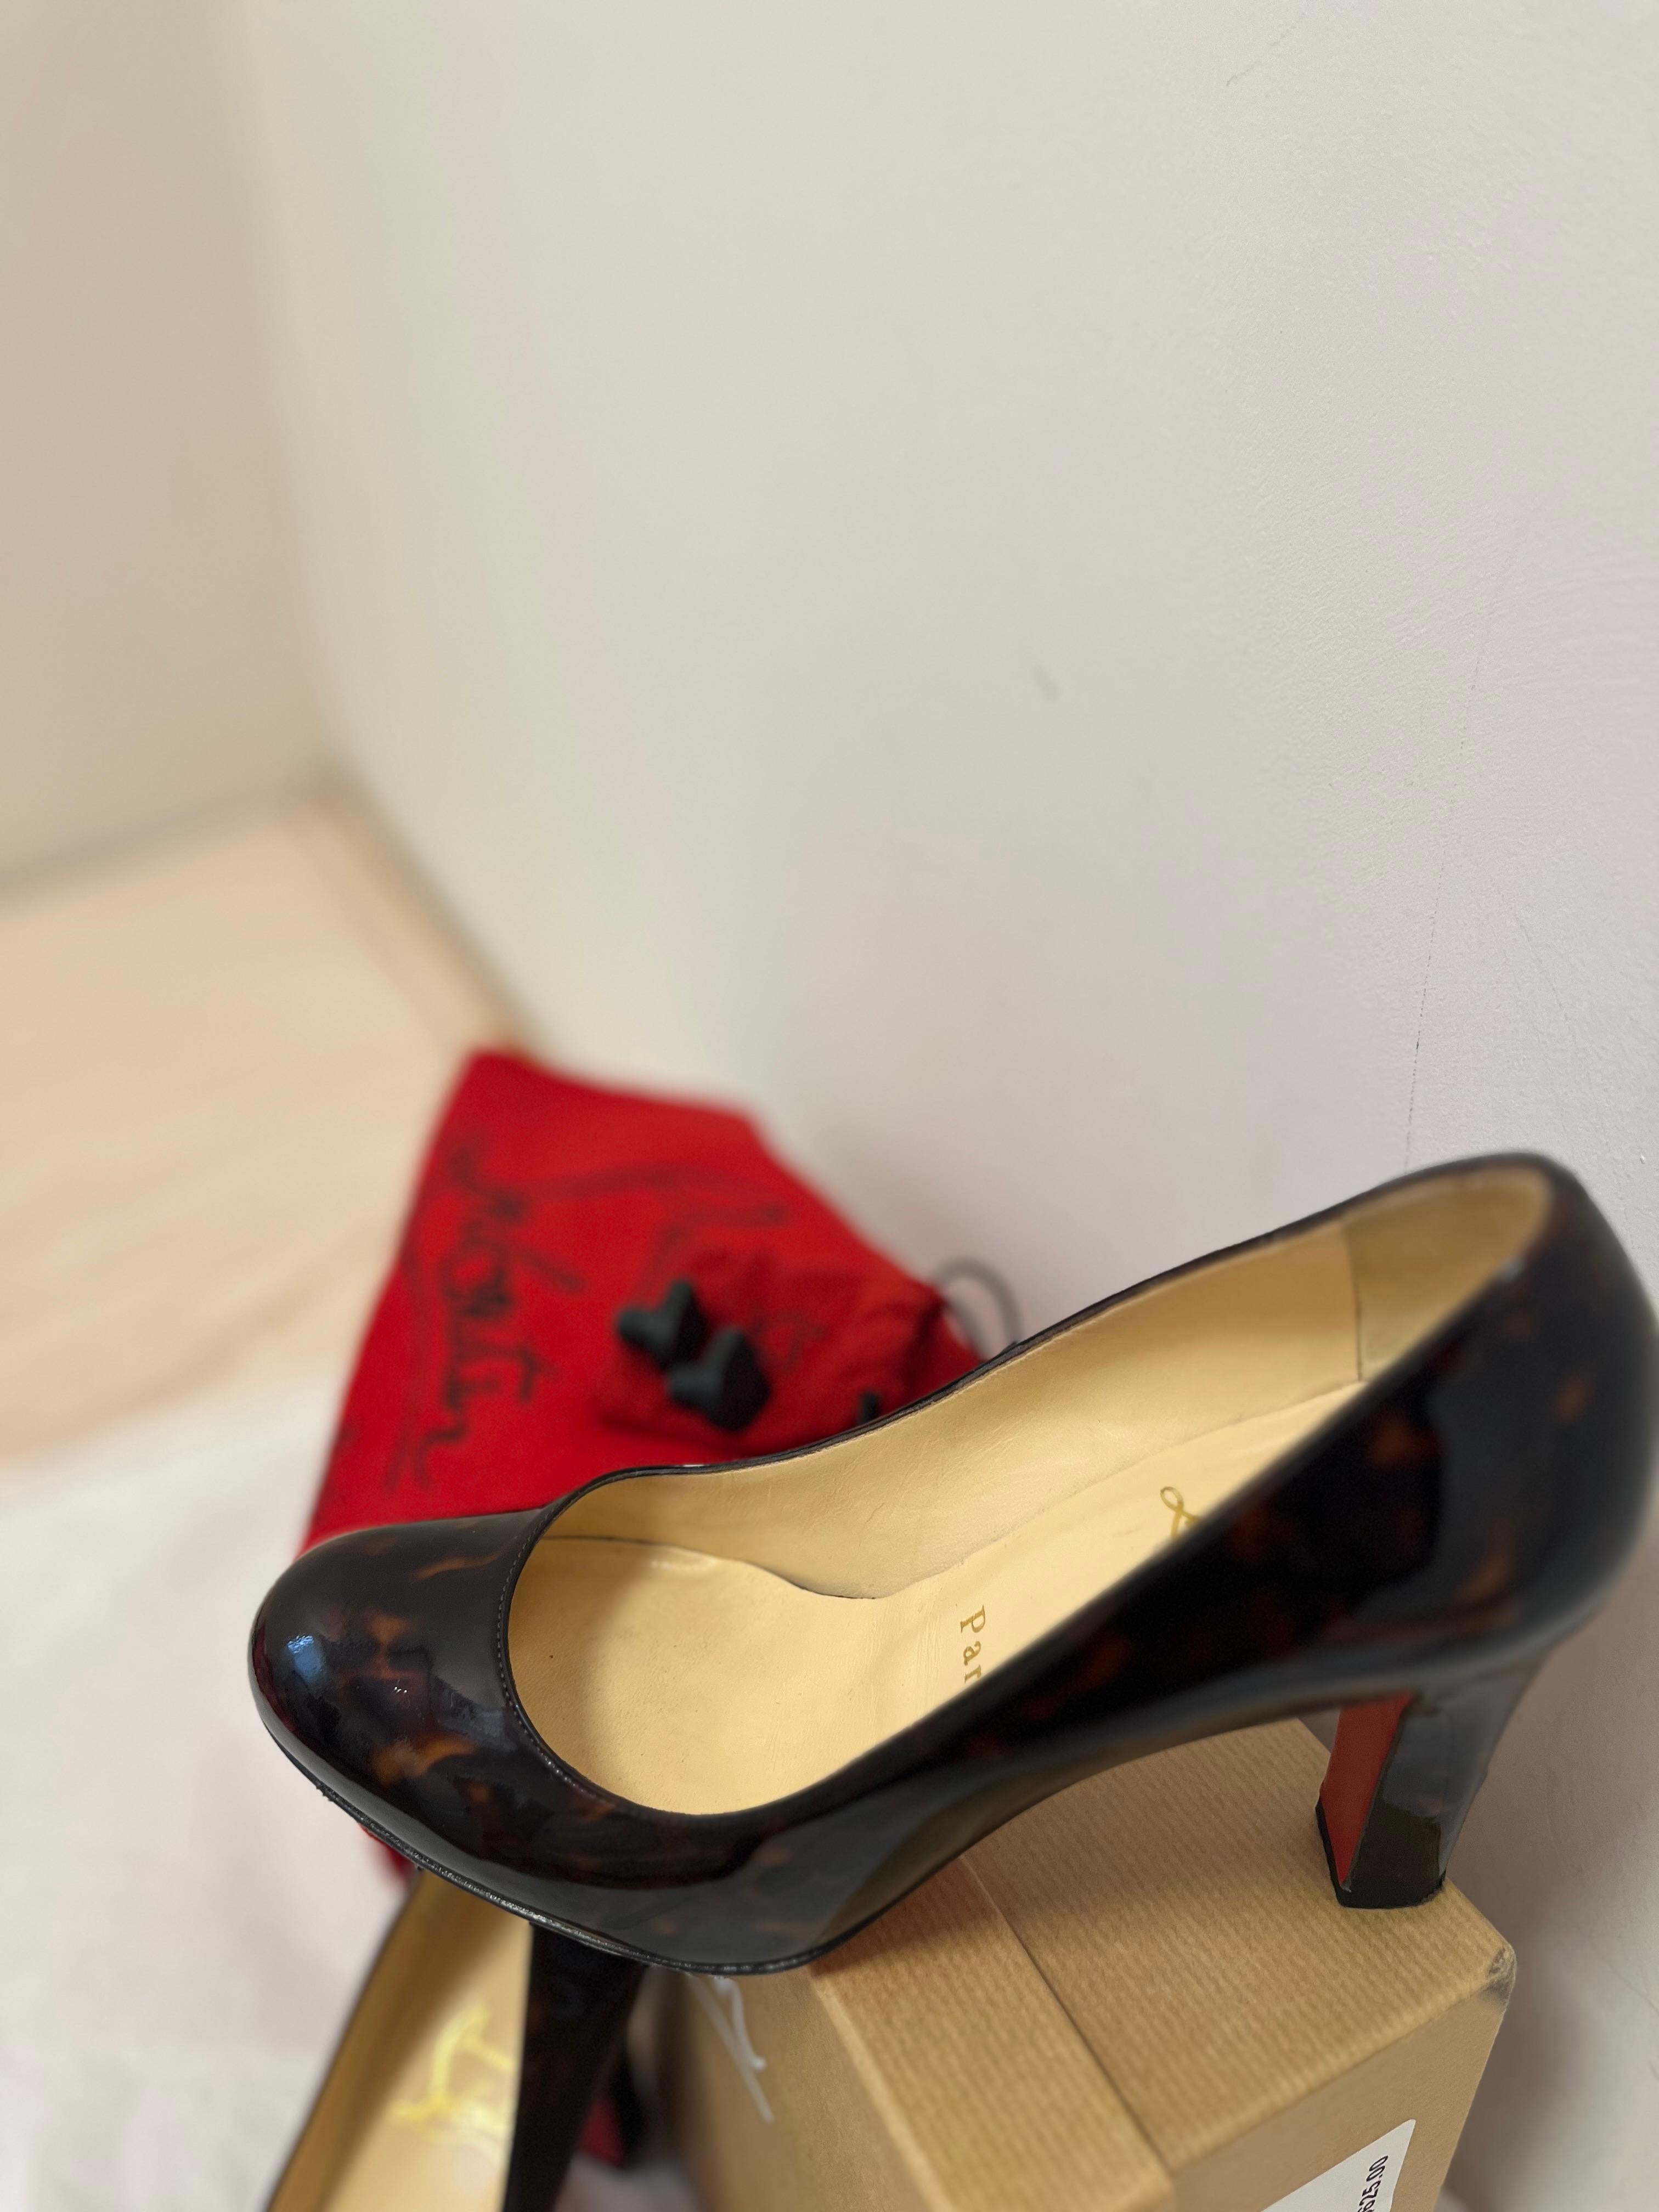 Christian Louboutin Tortoise Shell Pattern Patent Shoes 6.5 with Box In Good Condition For Sale In Port Hope, ON